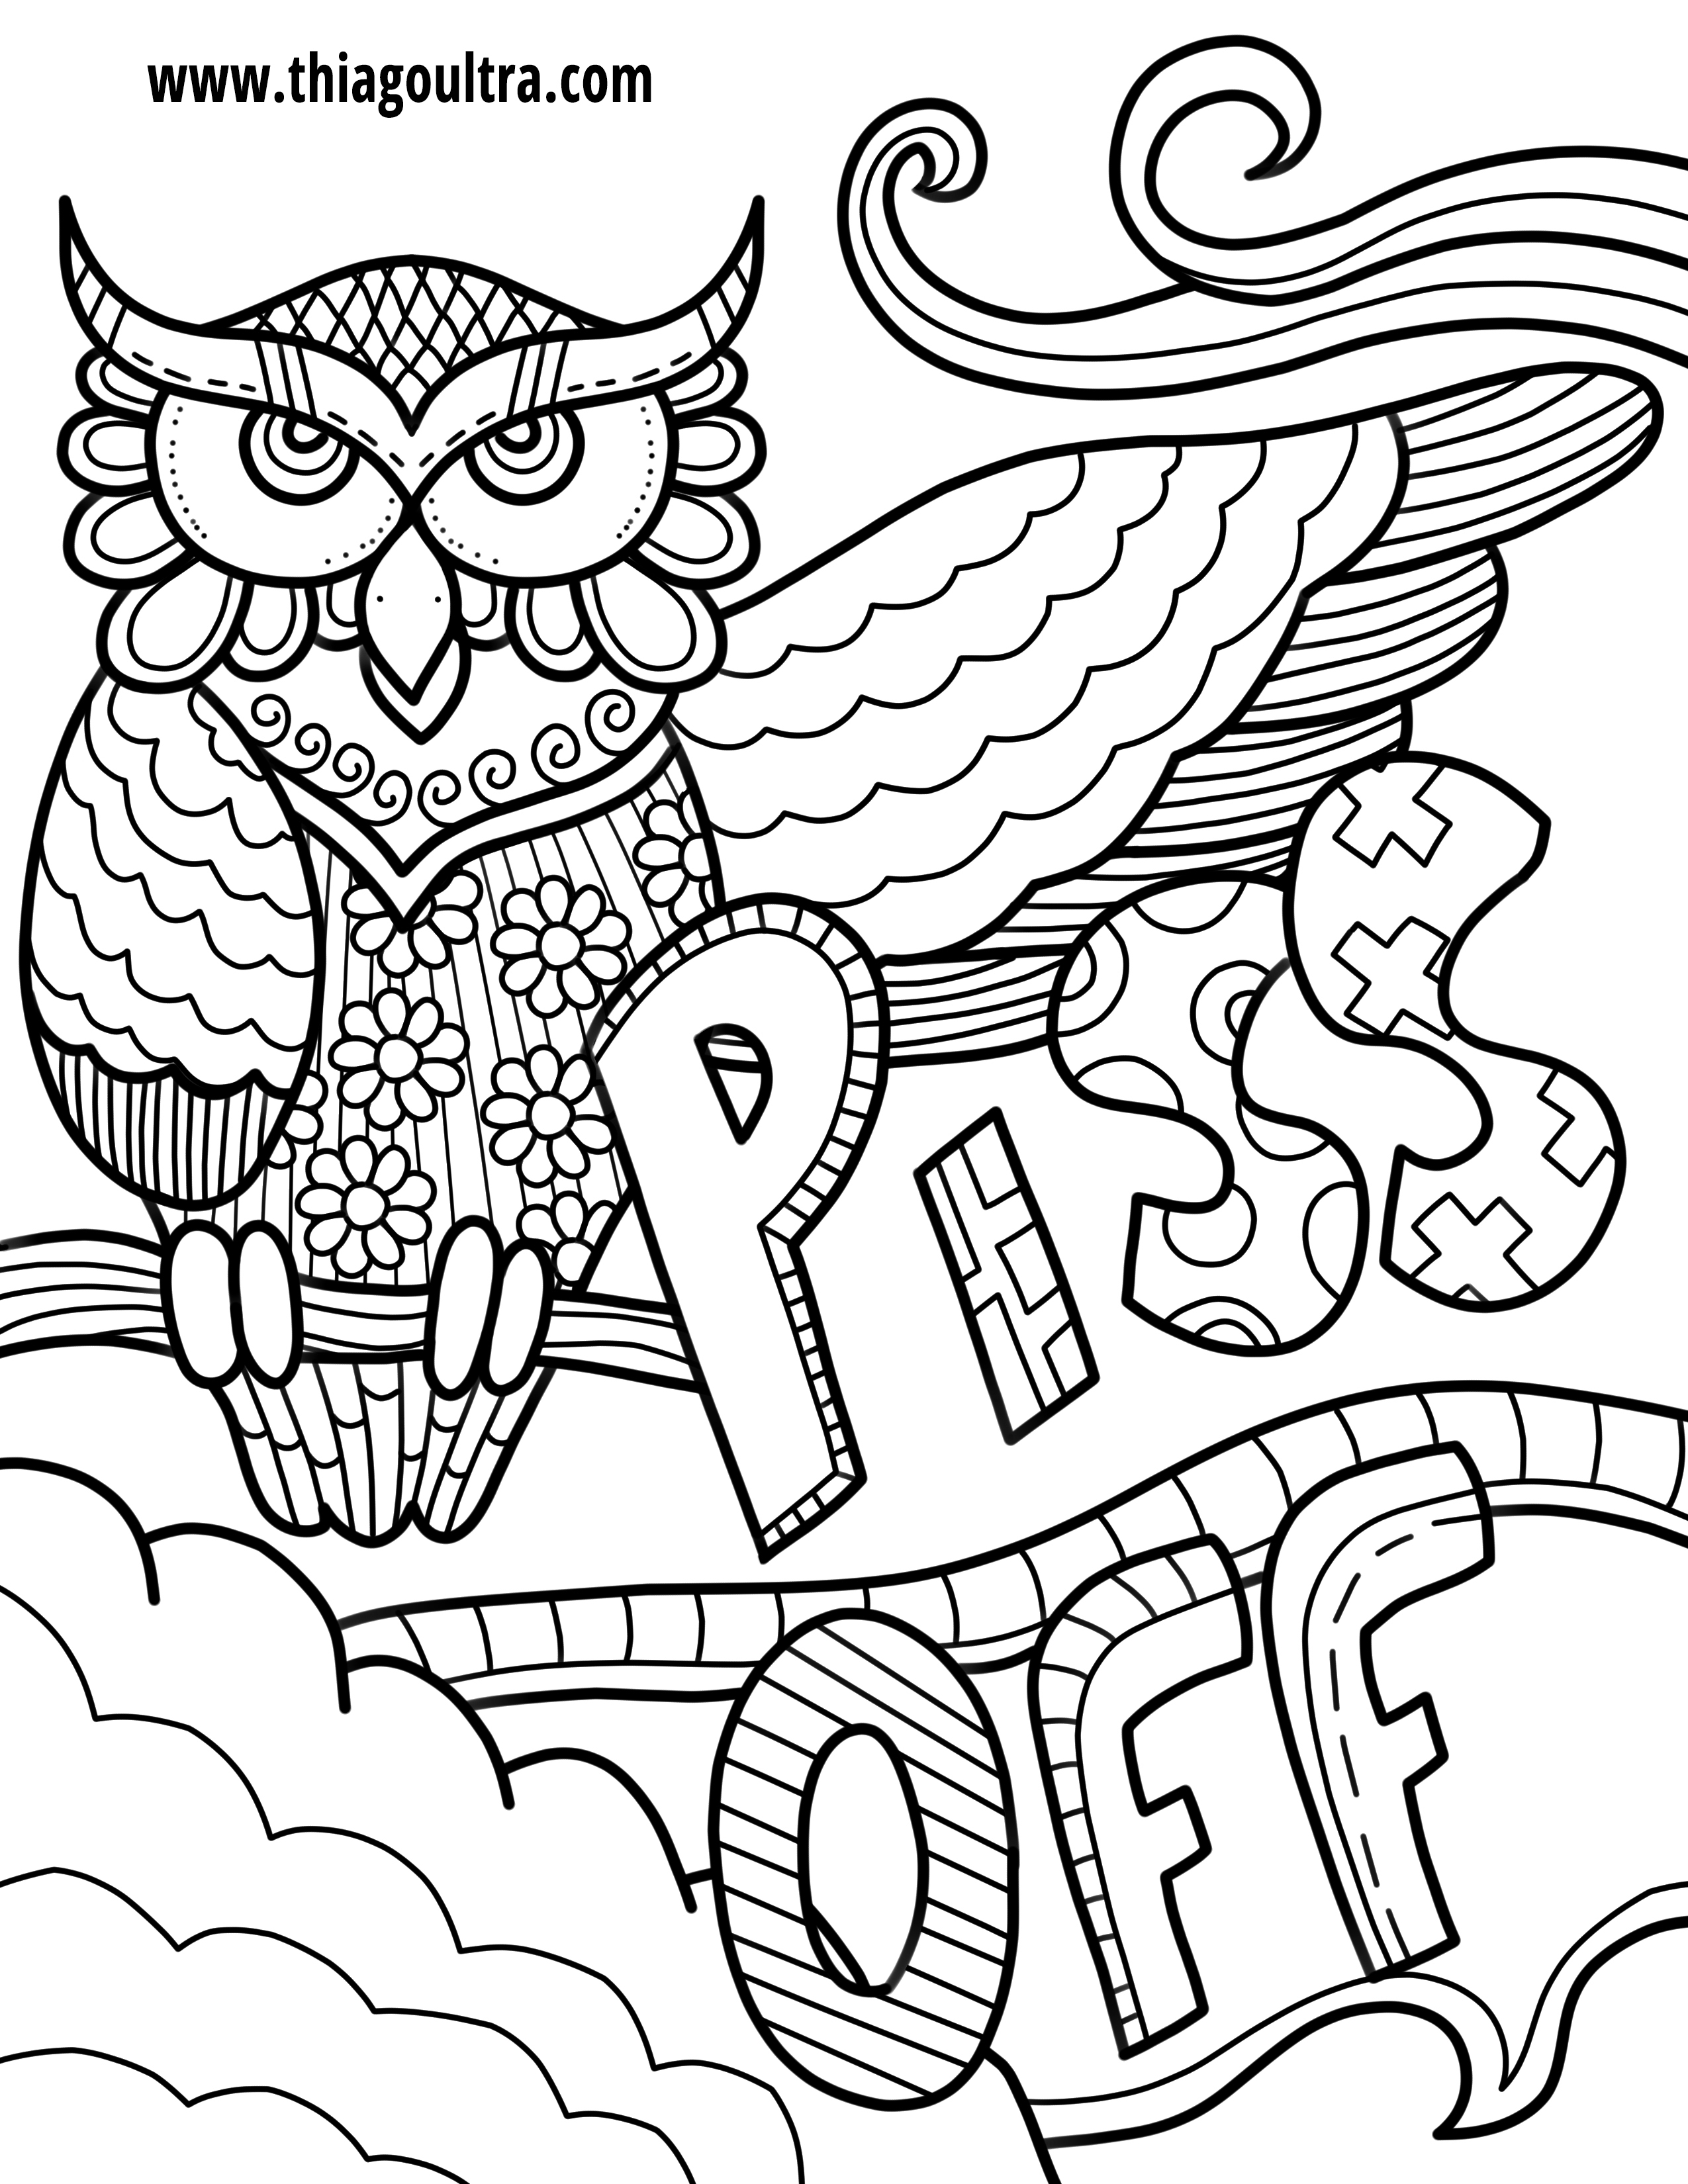 Coloring Pages : Free Coloring Pages Printable Napisy Me Reward - Free Printable Swear Word Coloring Pages